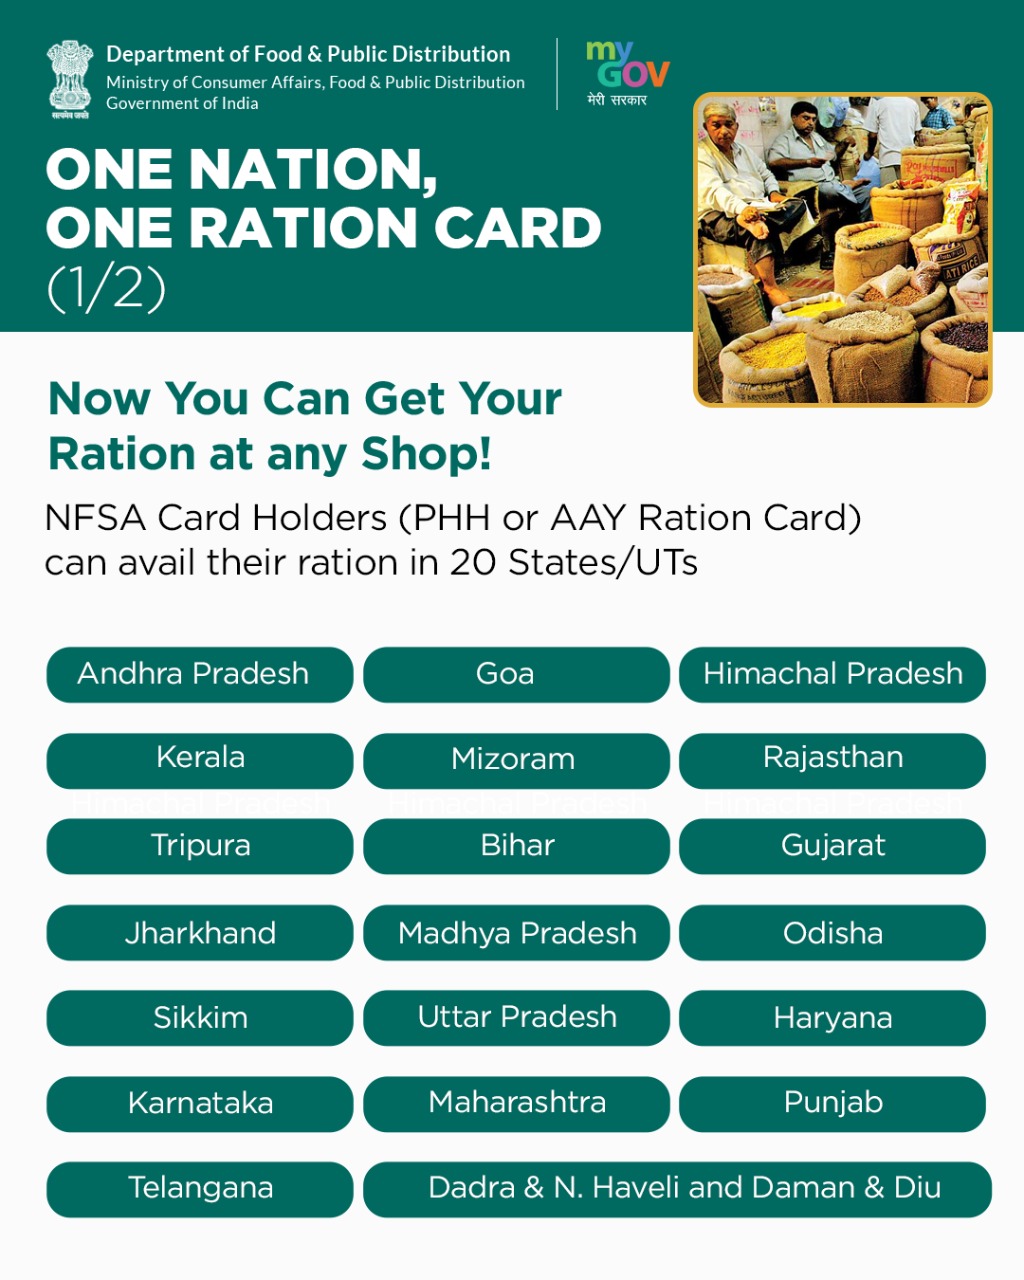 Mygovindia Surging Towards Fulfilling The Mission Of One Nation One Ration Card Transformingindia T Co D5ul7ygqlx T Co Cc9fd8hczn Twitter